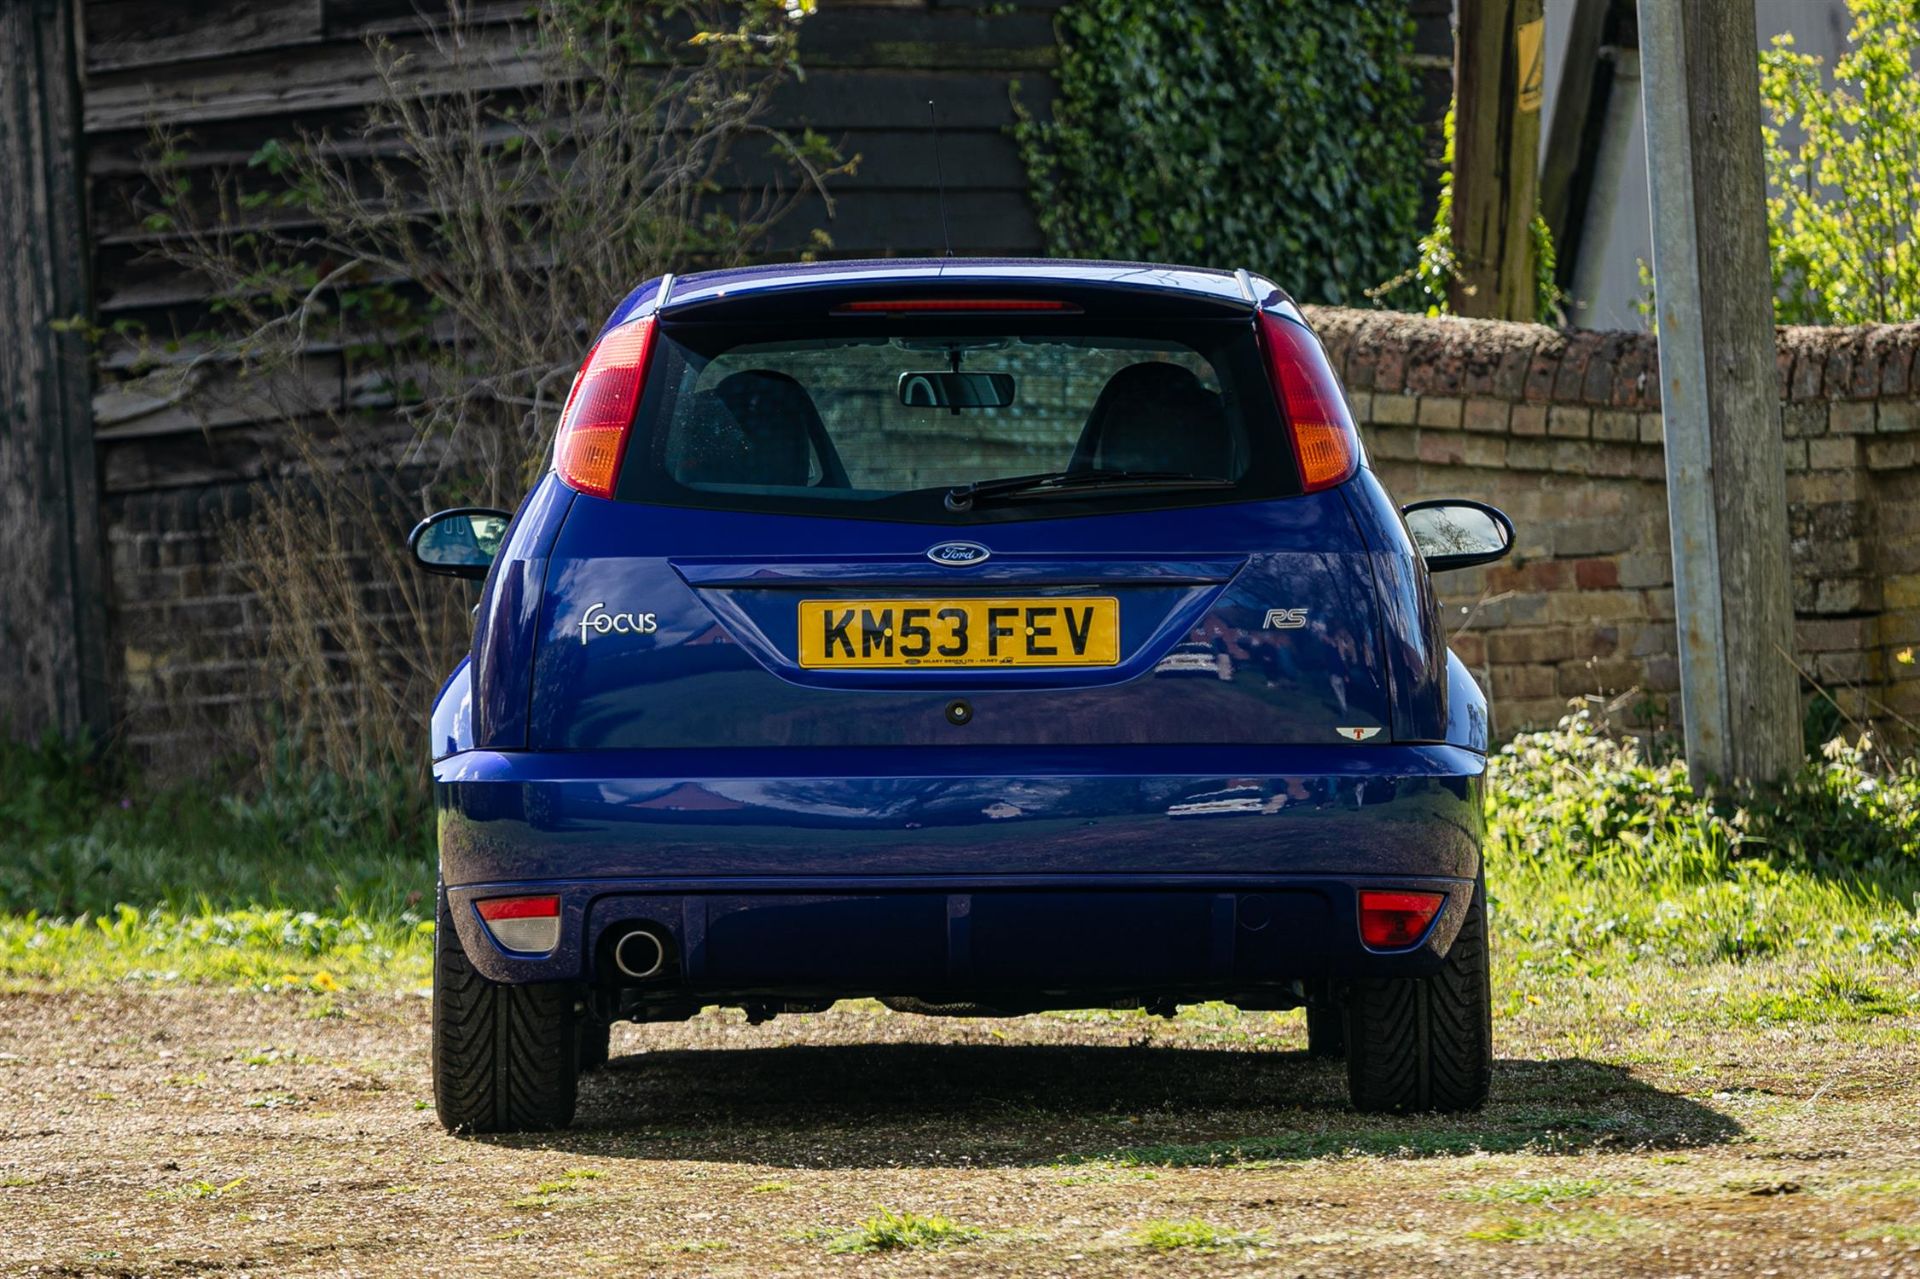 2003 Ford Focus RS Mk1 - 3265 Miles - Image 7 of 10